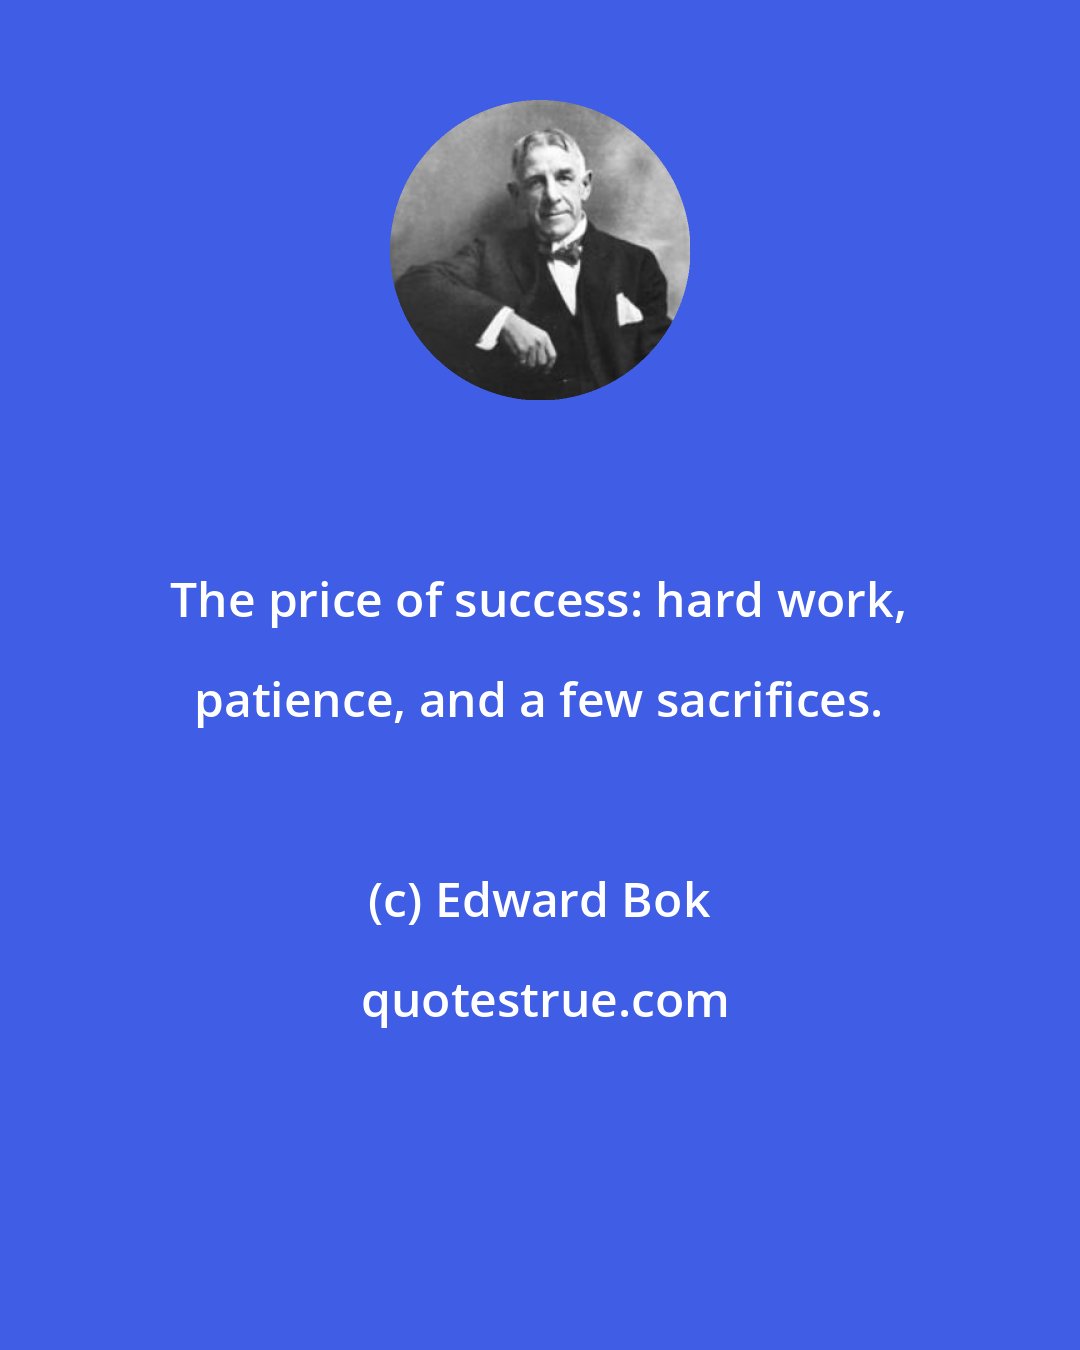 Edward Bok: The price of success: hard work, patience, and a few sacrifices.